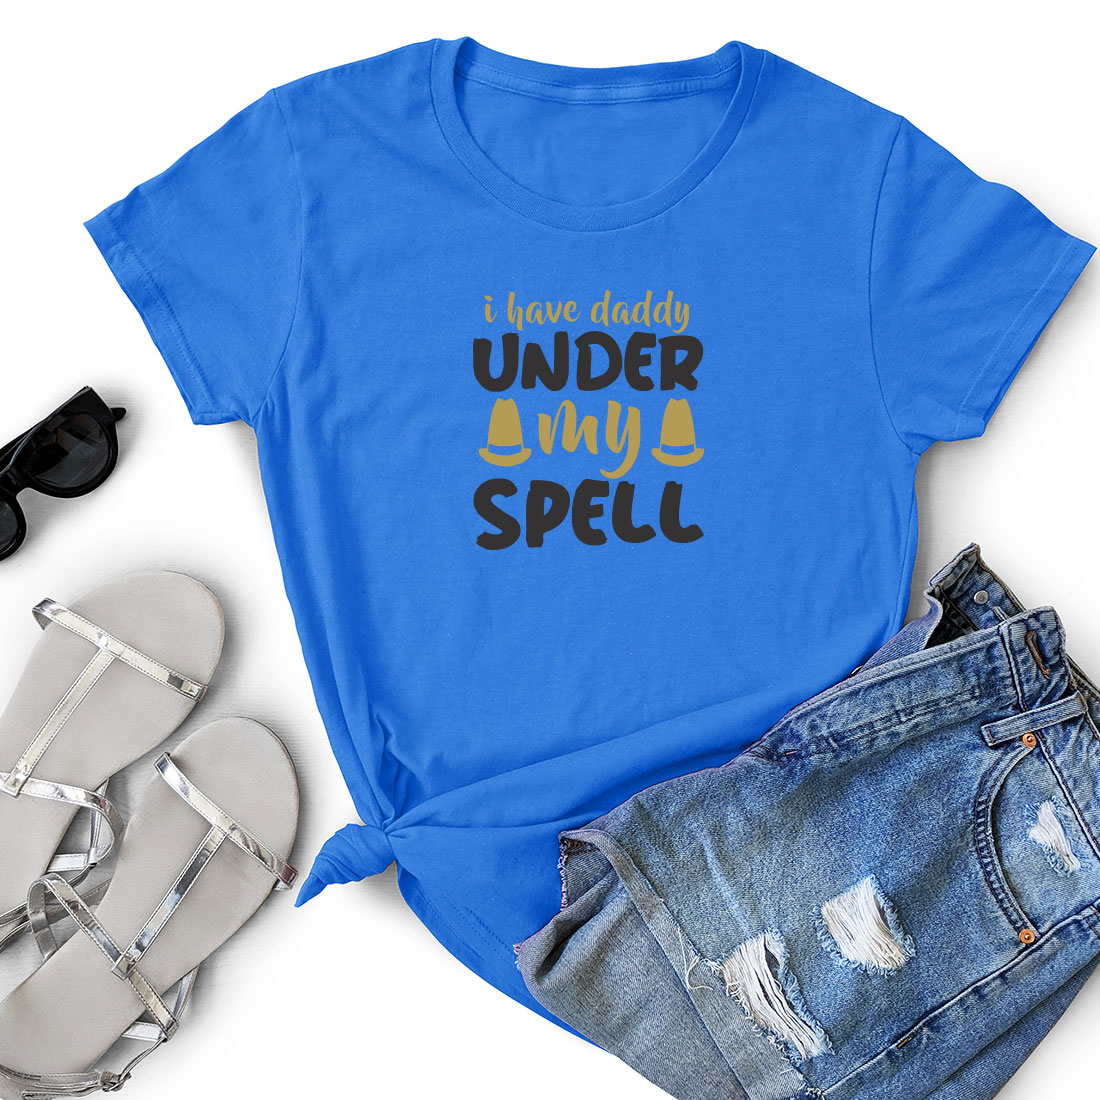 T - shirt that says under a spell next to a pair of shorts.